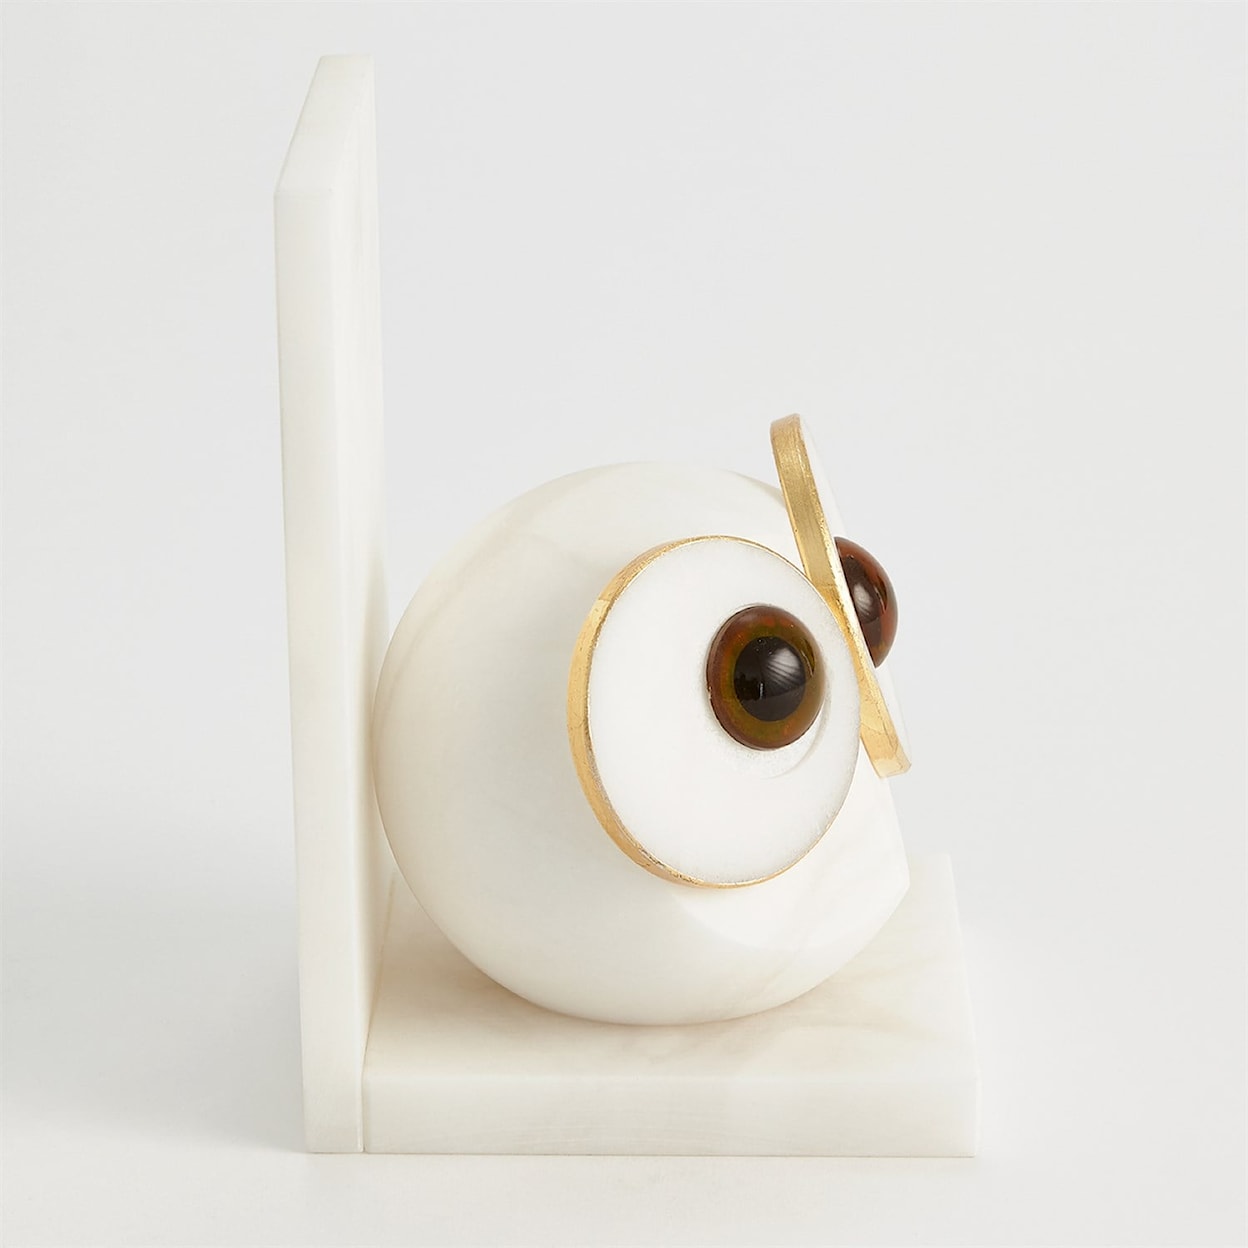 Global Views Accents Pair Alabaster Big Eyed Owl Bookends